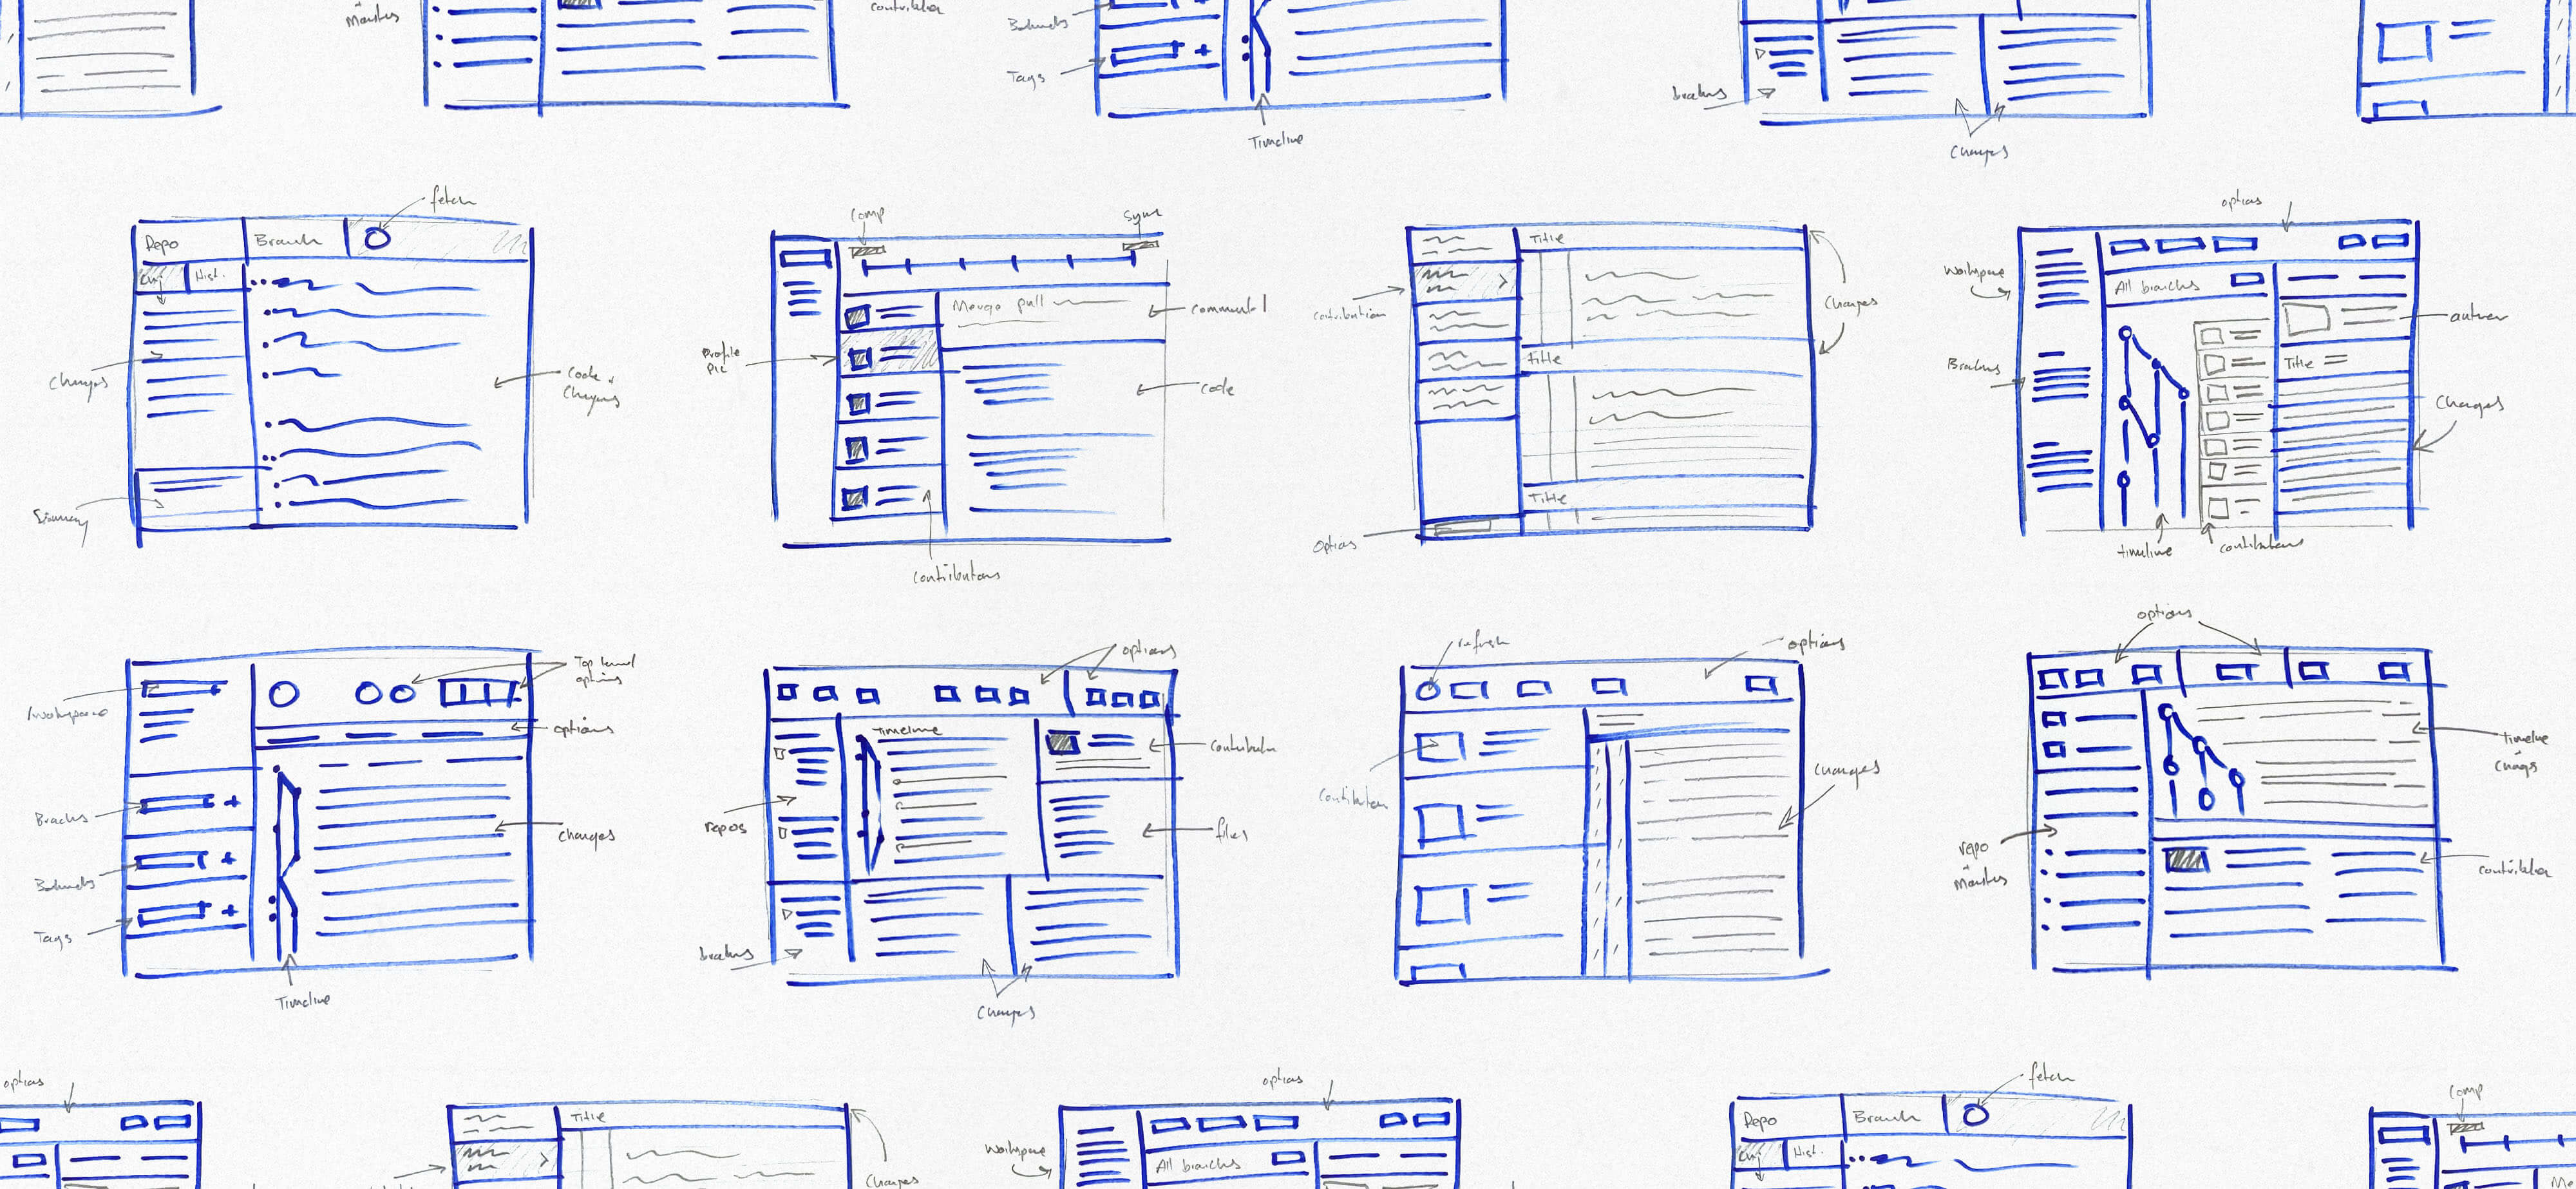 Beginning the design process with quick wireframes.